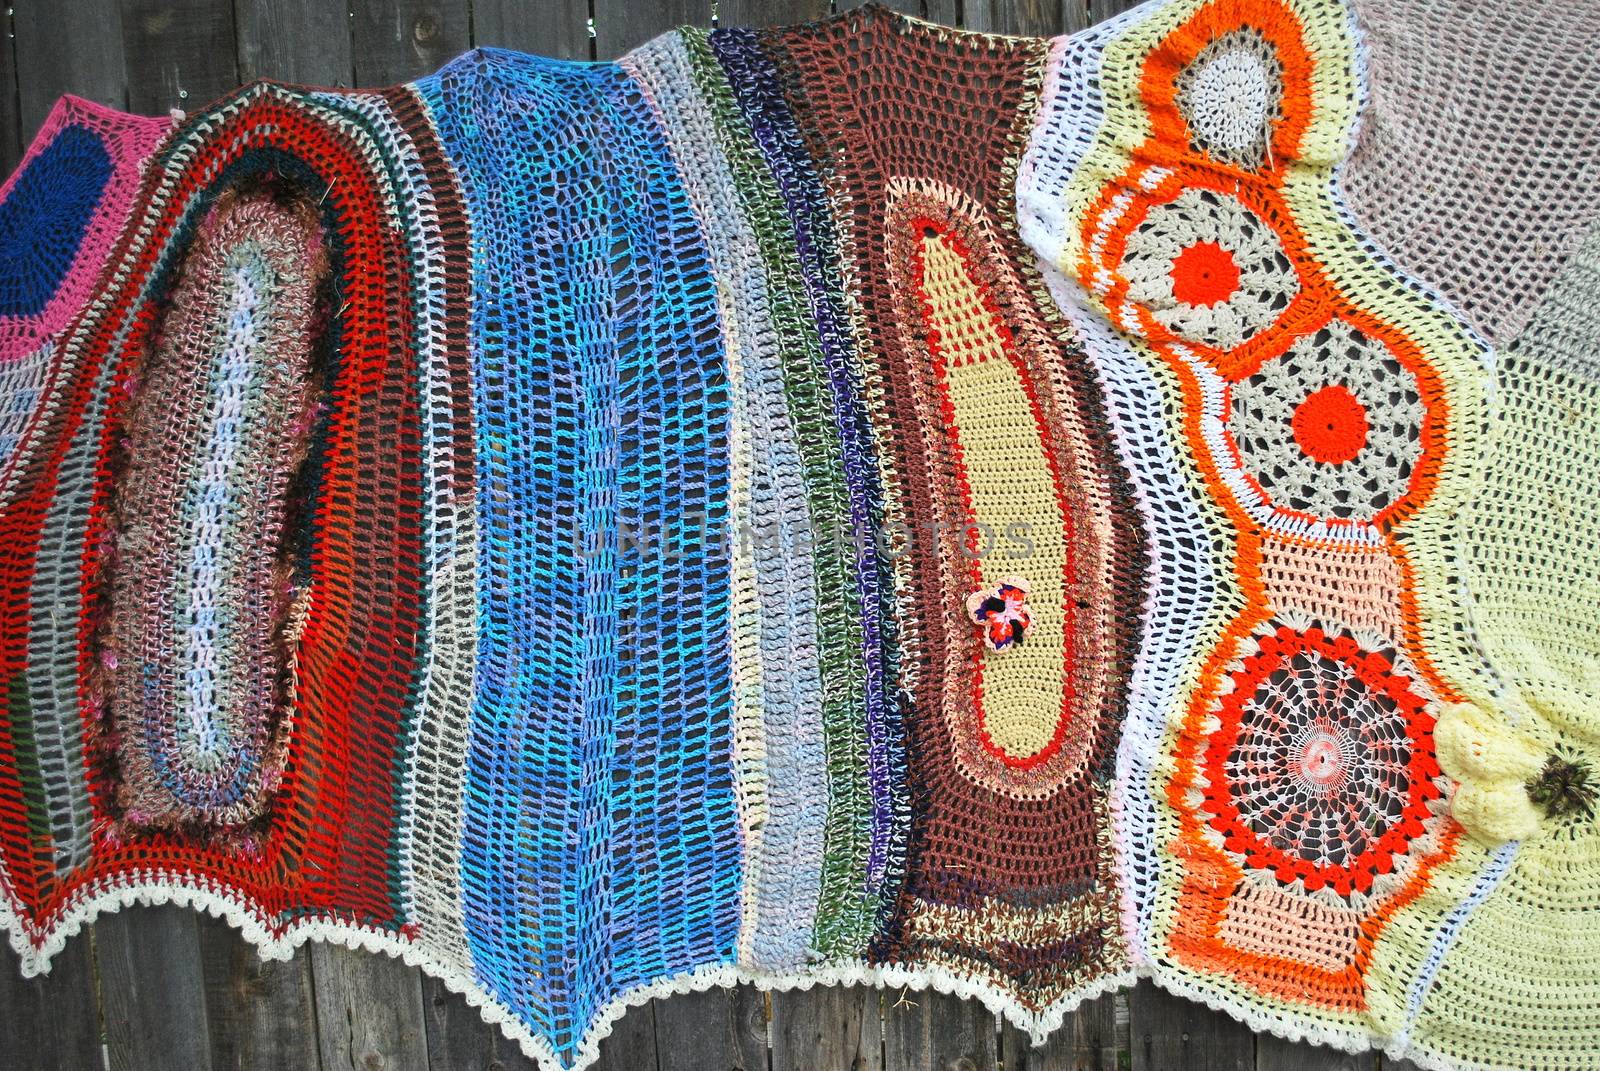 Colorful crochet patterns displayed outside.